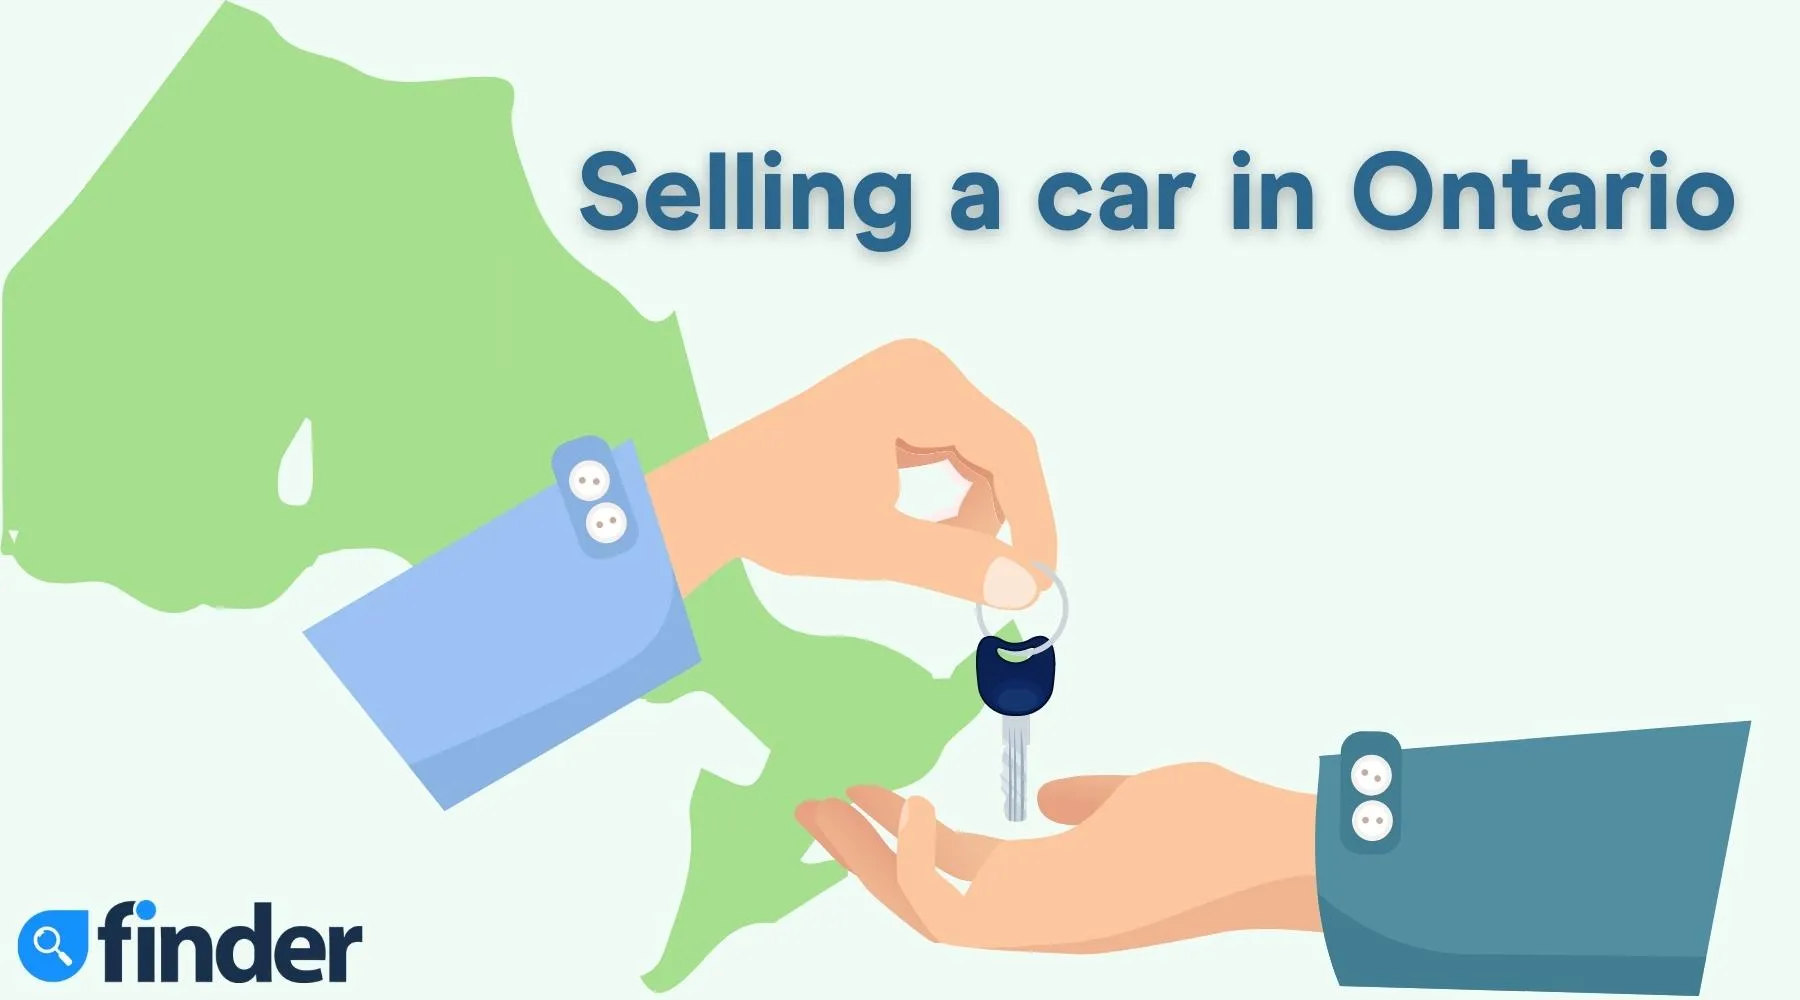 Selling a car in Ontario